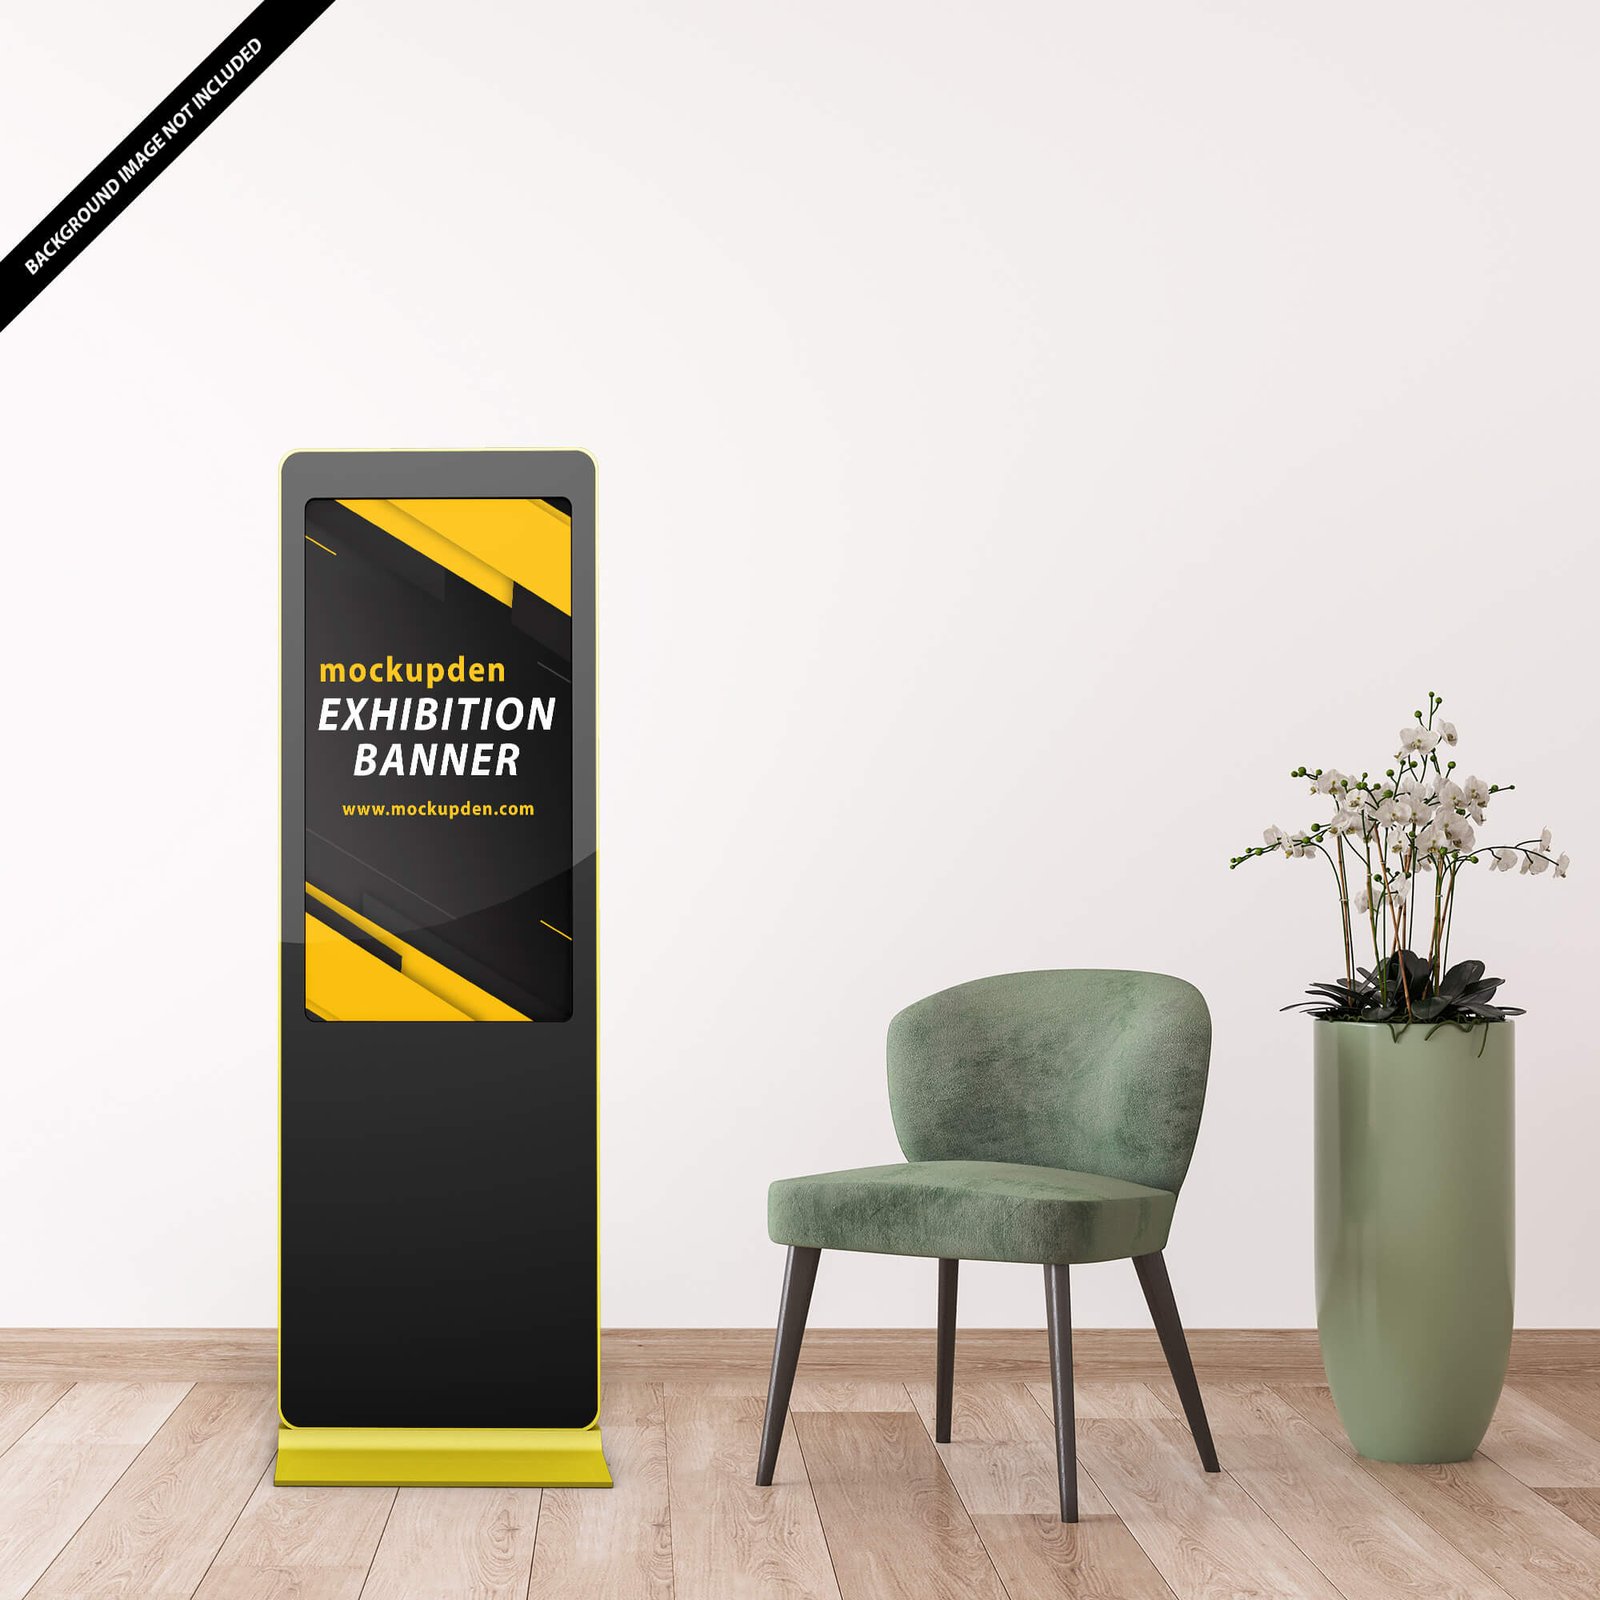 Free Exhibition Banner Mockup PSD Template